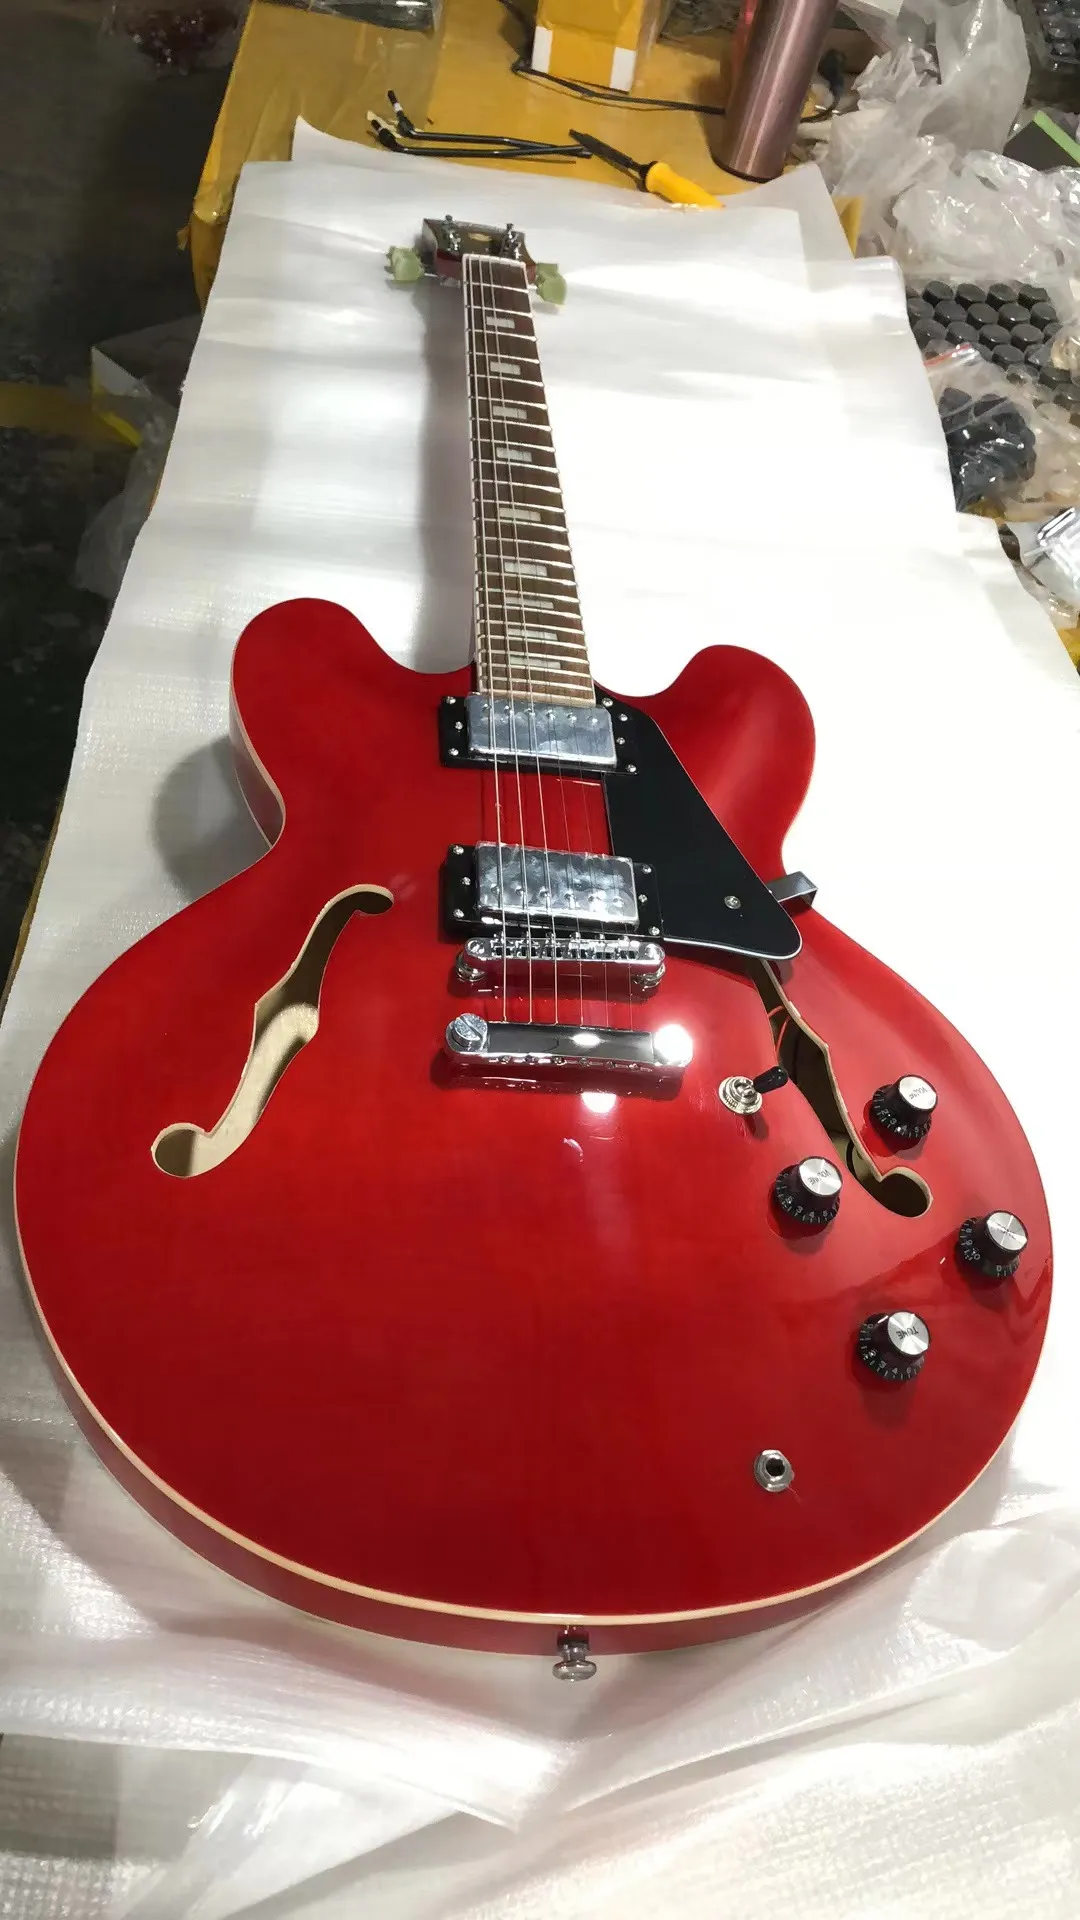 Ome 6 String Semi Hollow Electric Guitar Rosewood Fingerboard Finish Red